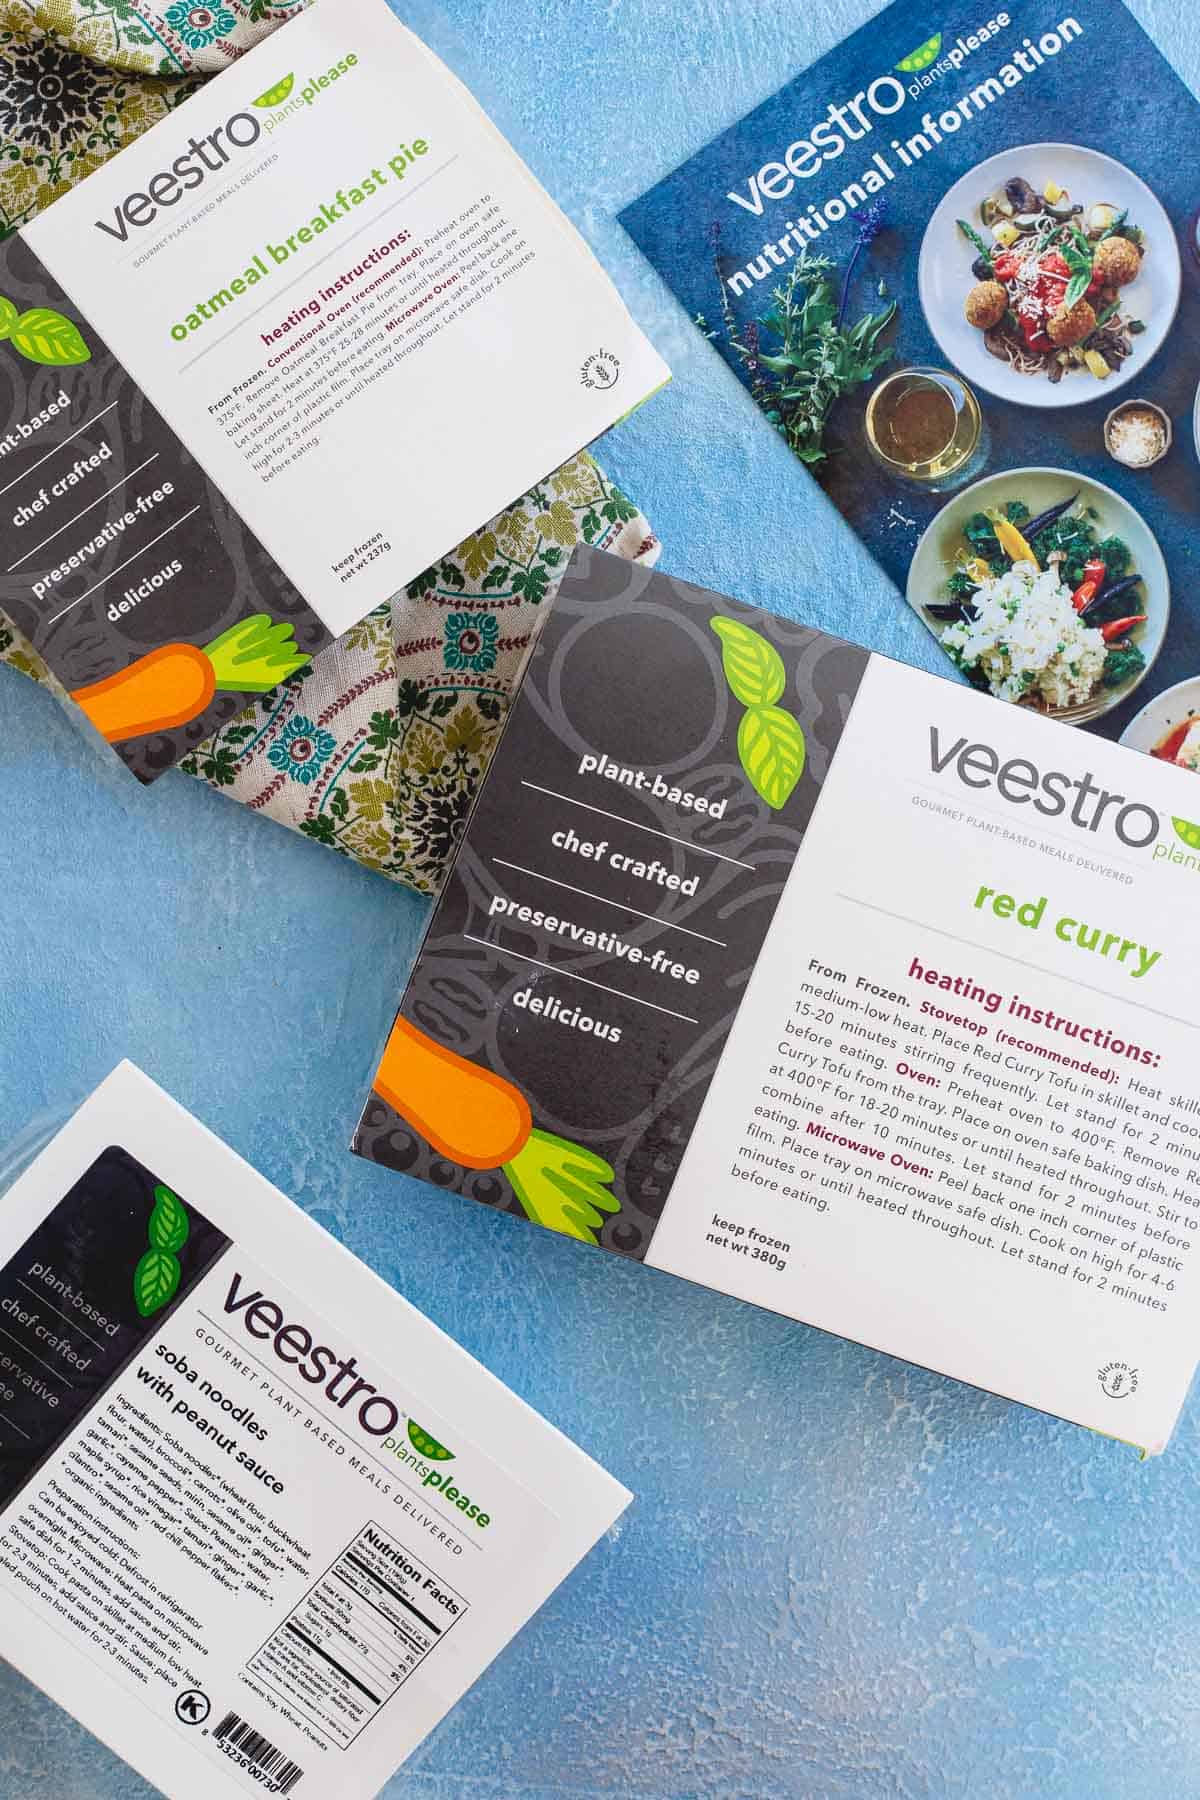 Veestro plant based meal delivery service provides pre-made meals ready to heat up and enjoy!